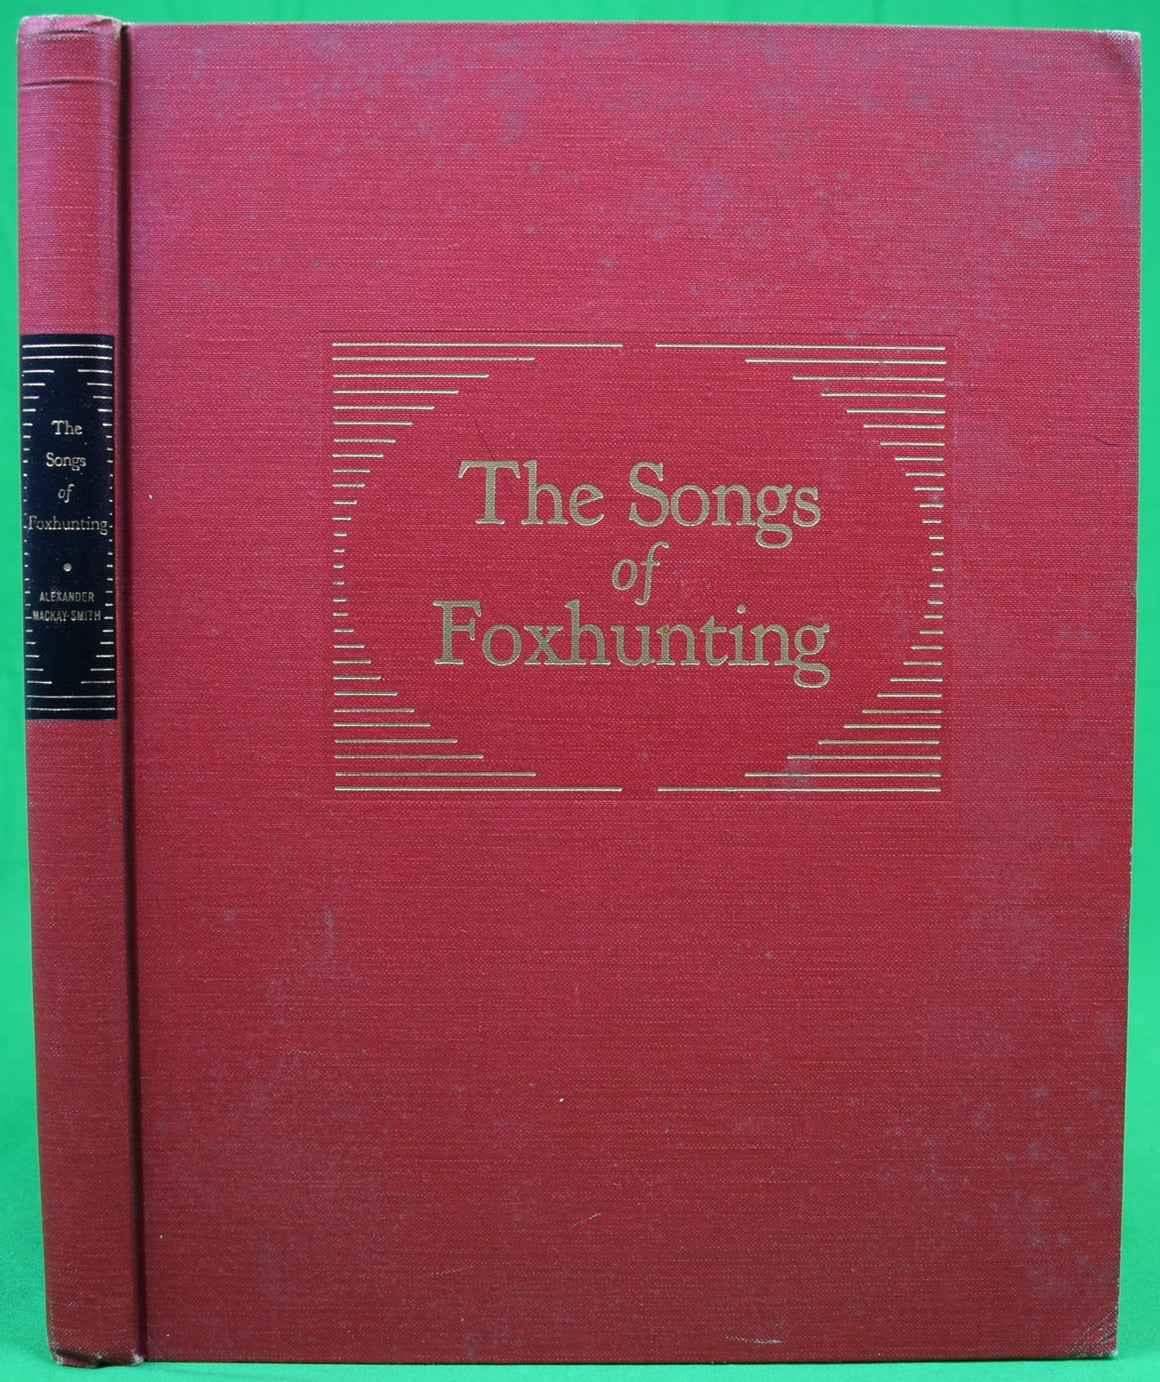 "The Songs Of Foxhunting" 1974 MACKAY-SMITH, Alexander (SIGNED)